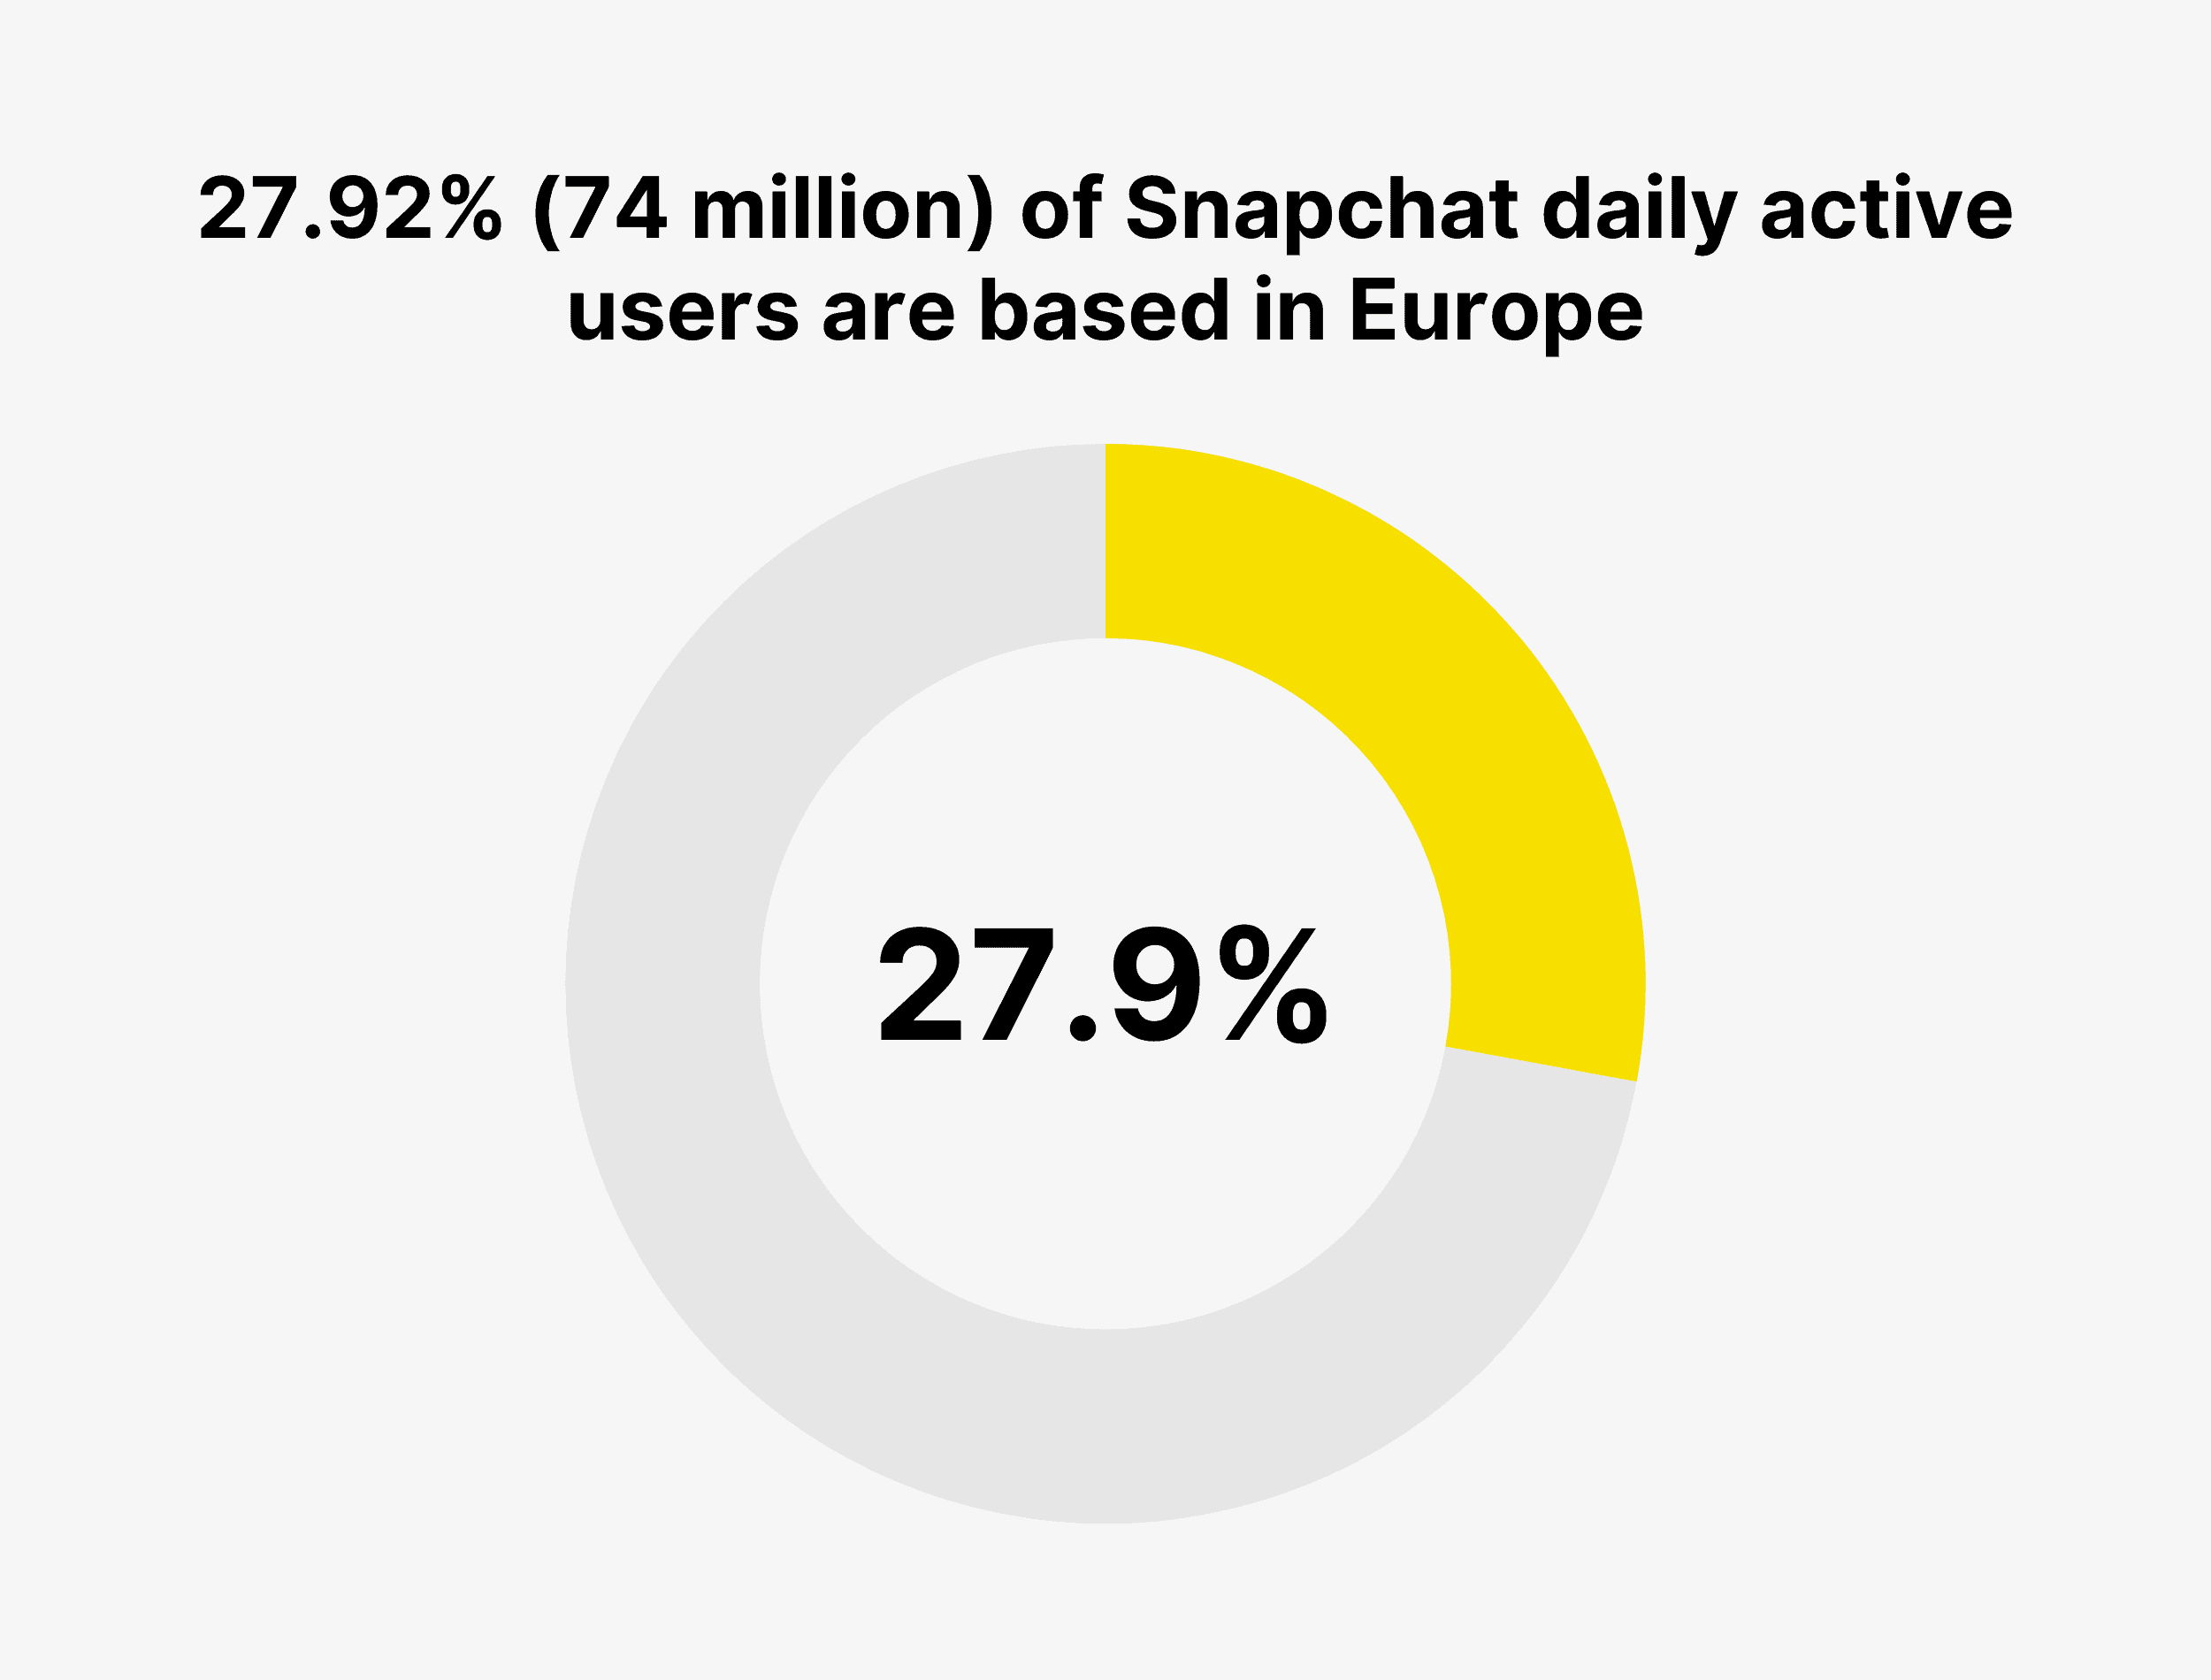 27.92% (74 million) of Snapchat daily active users are based in Europe